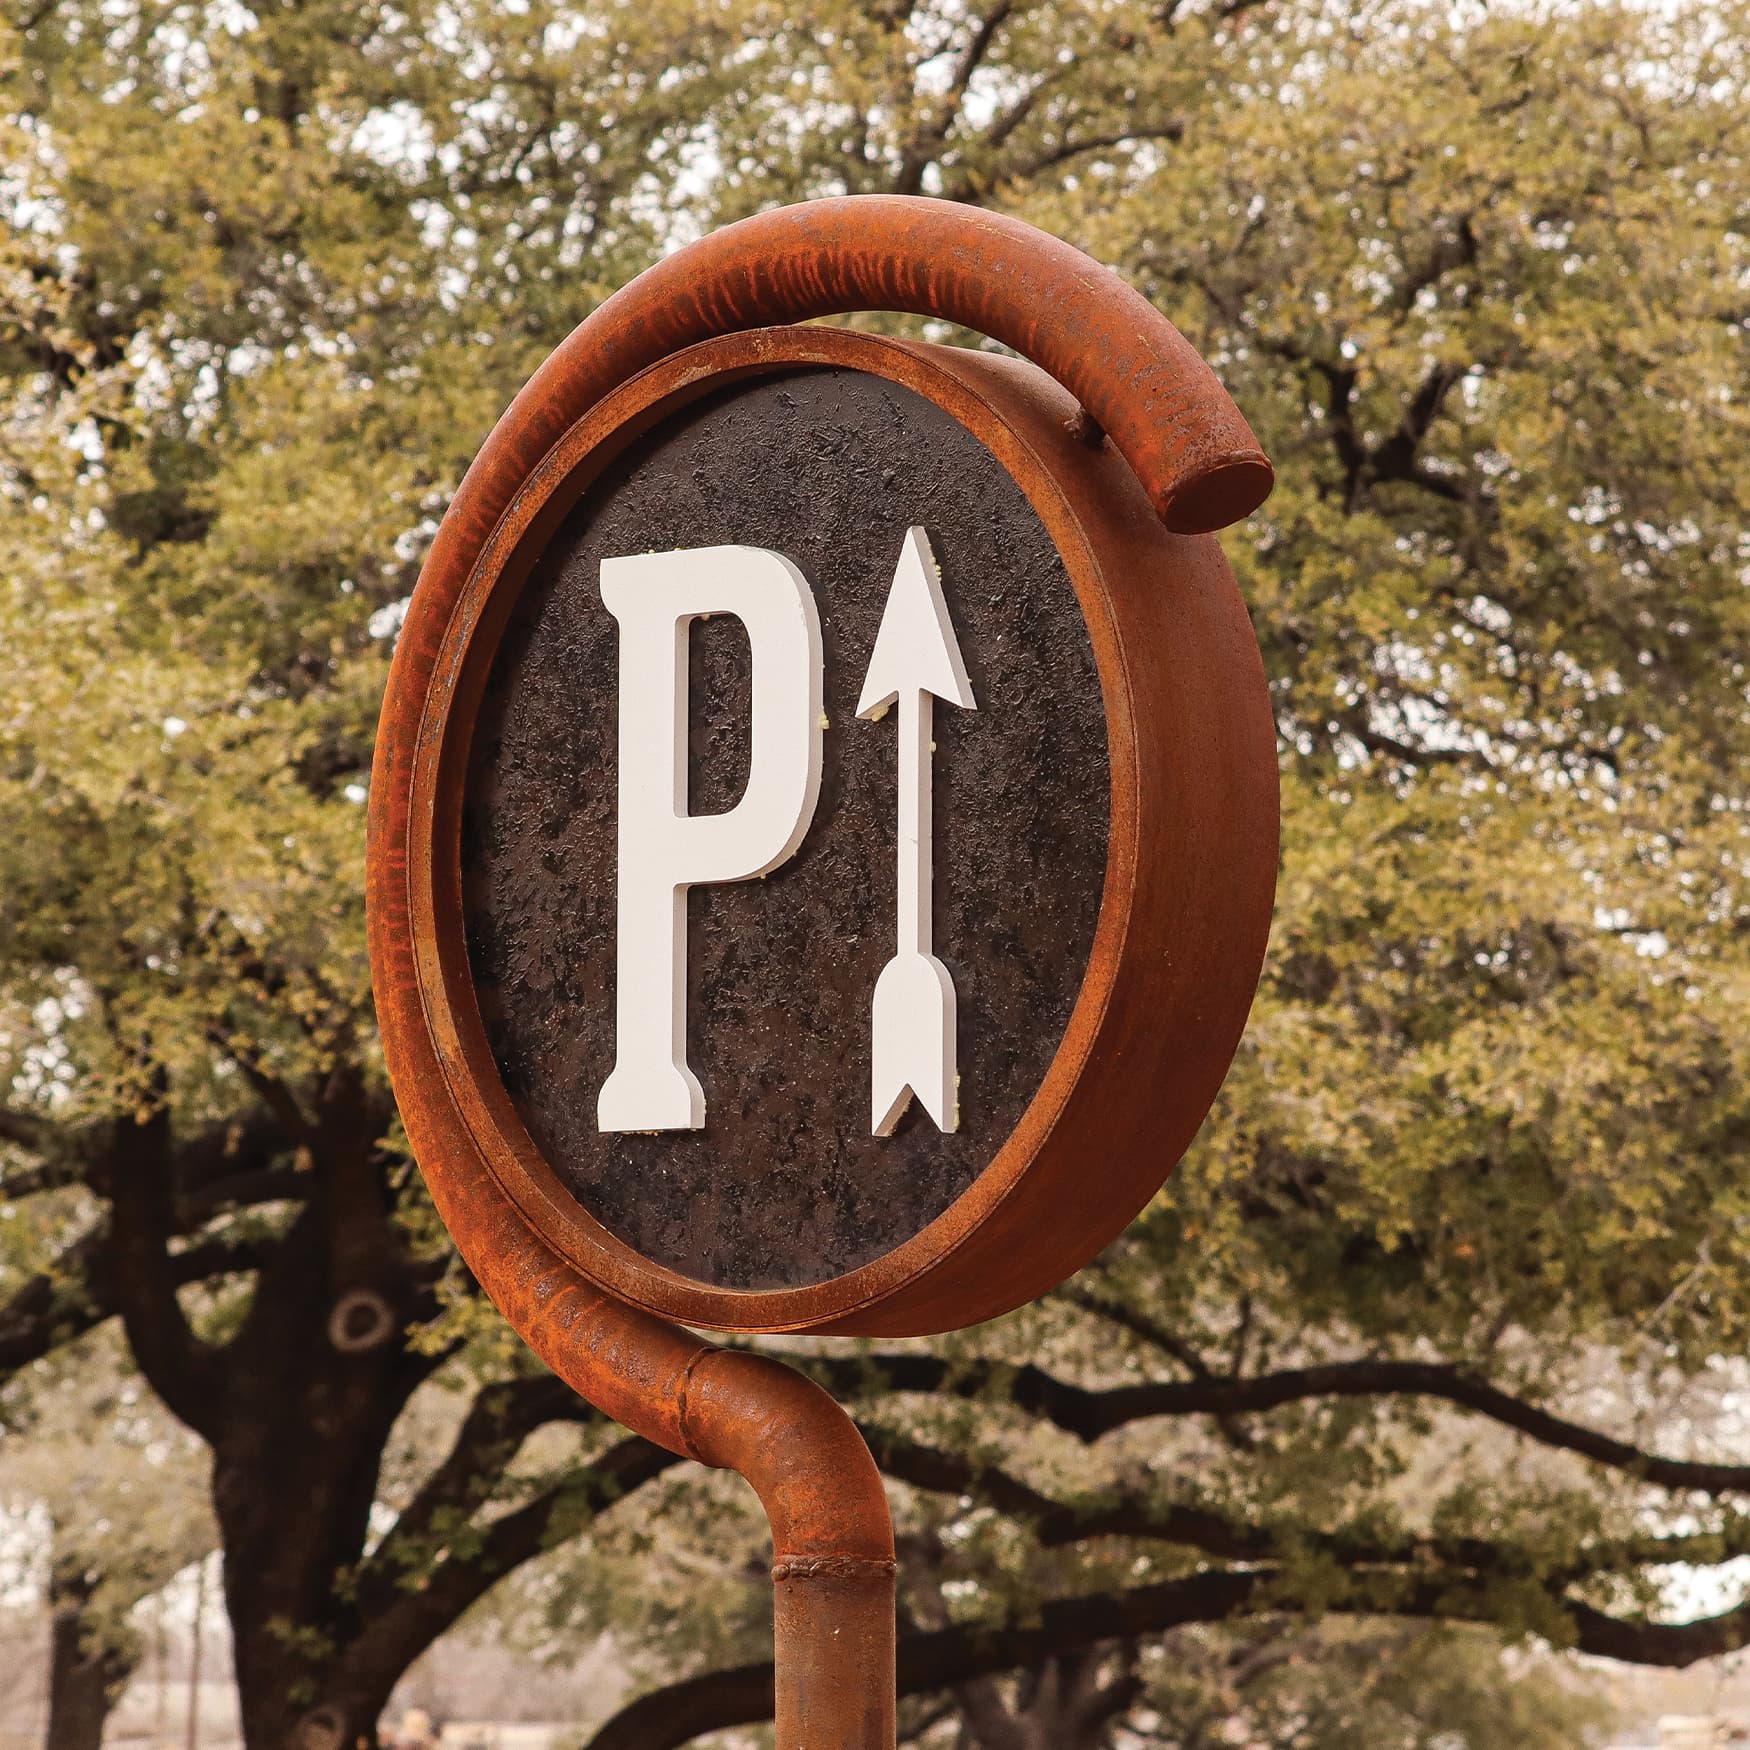 Close up detail image of a rustic style Parking directional sign.